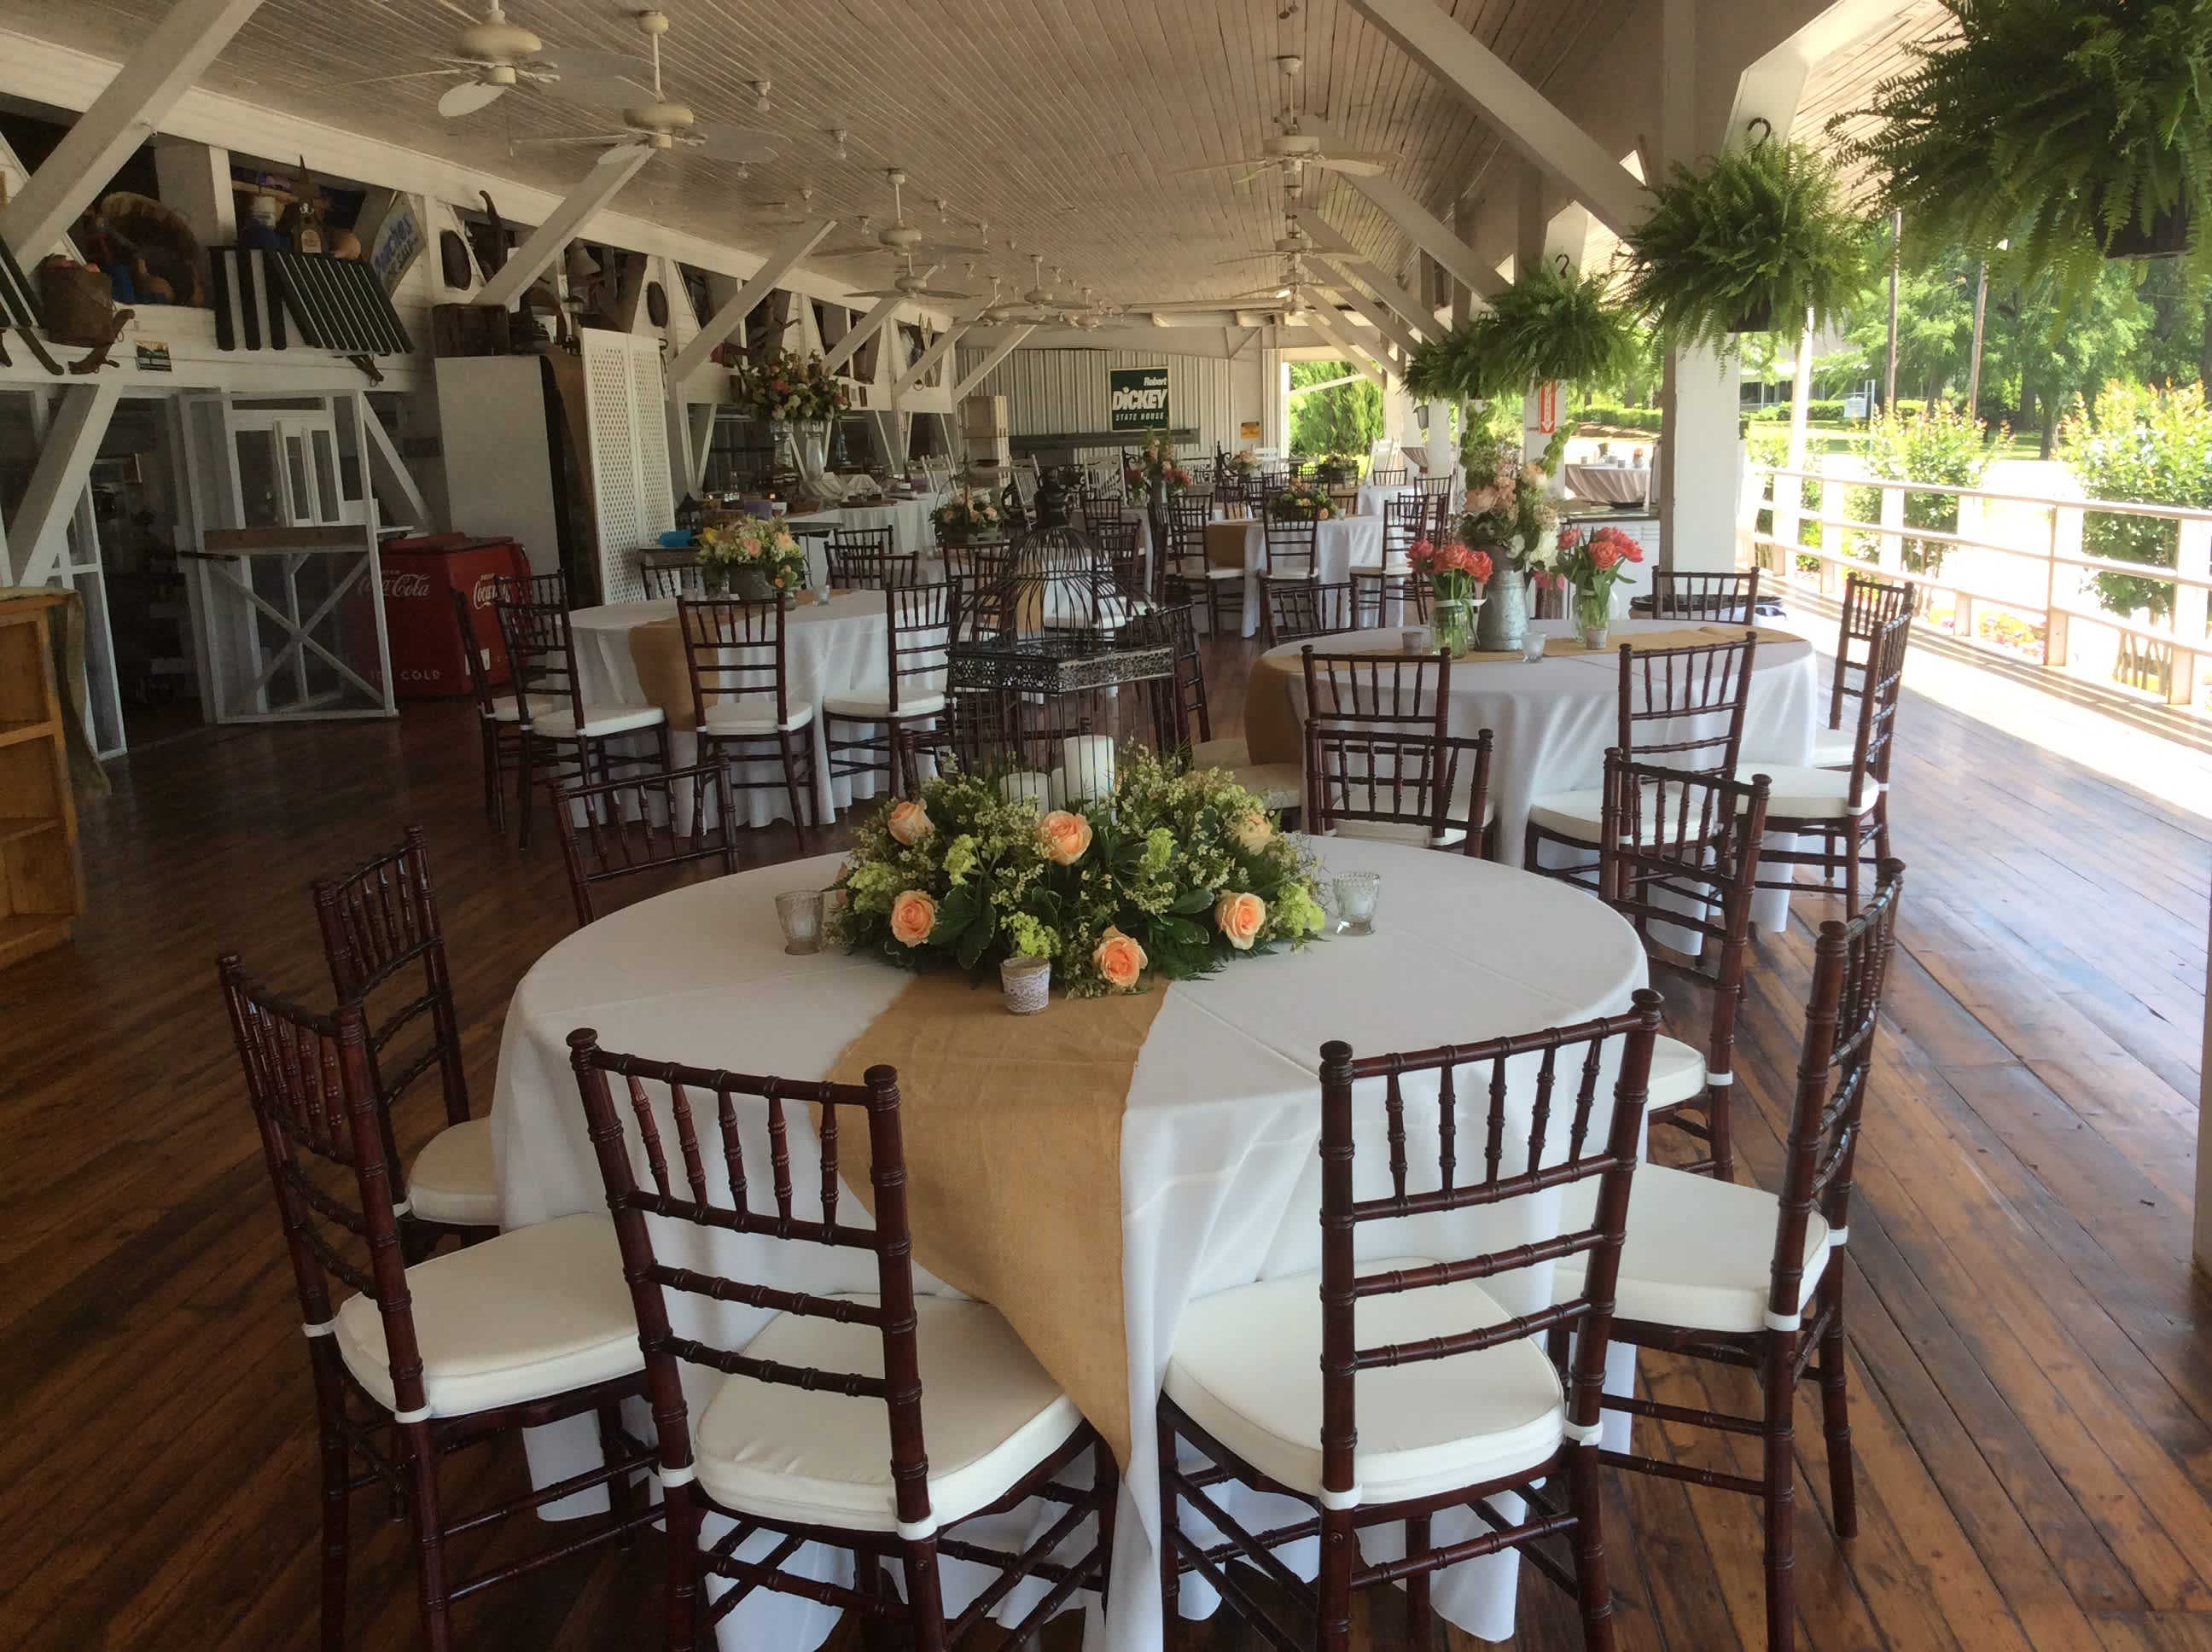 3 Local Wedding Venues That Are Off The Beaten Path